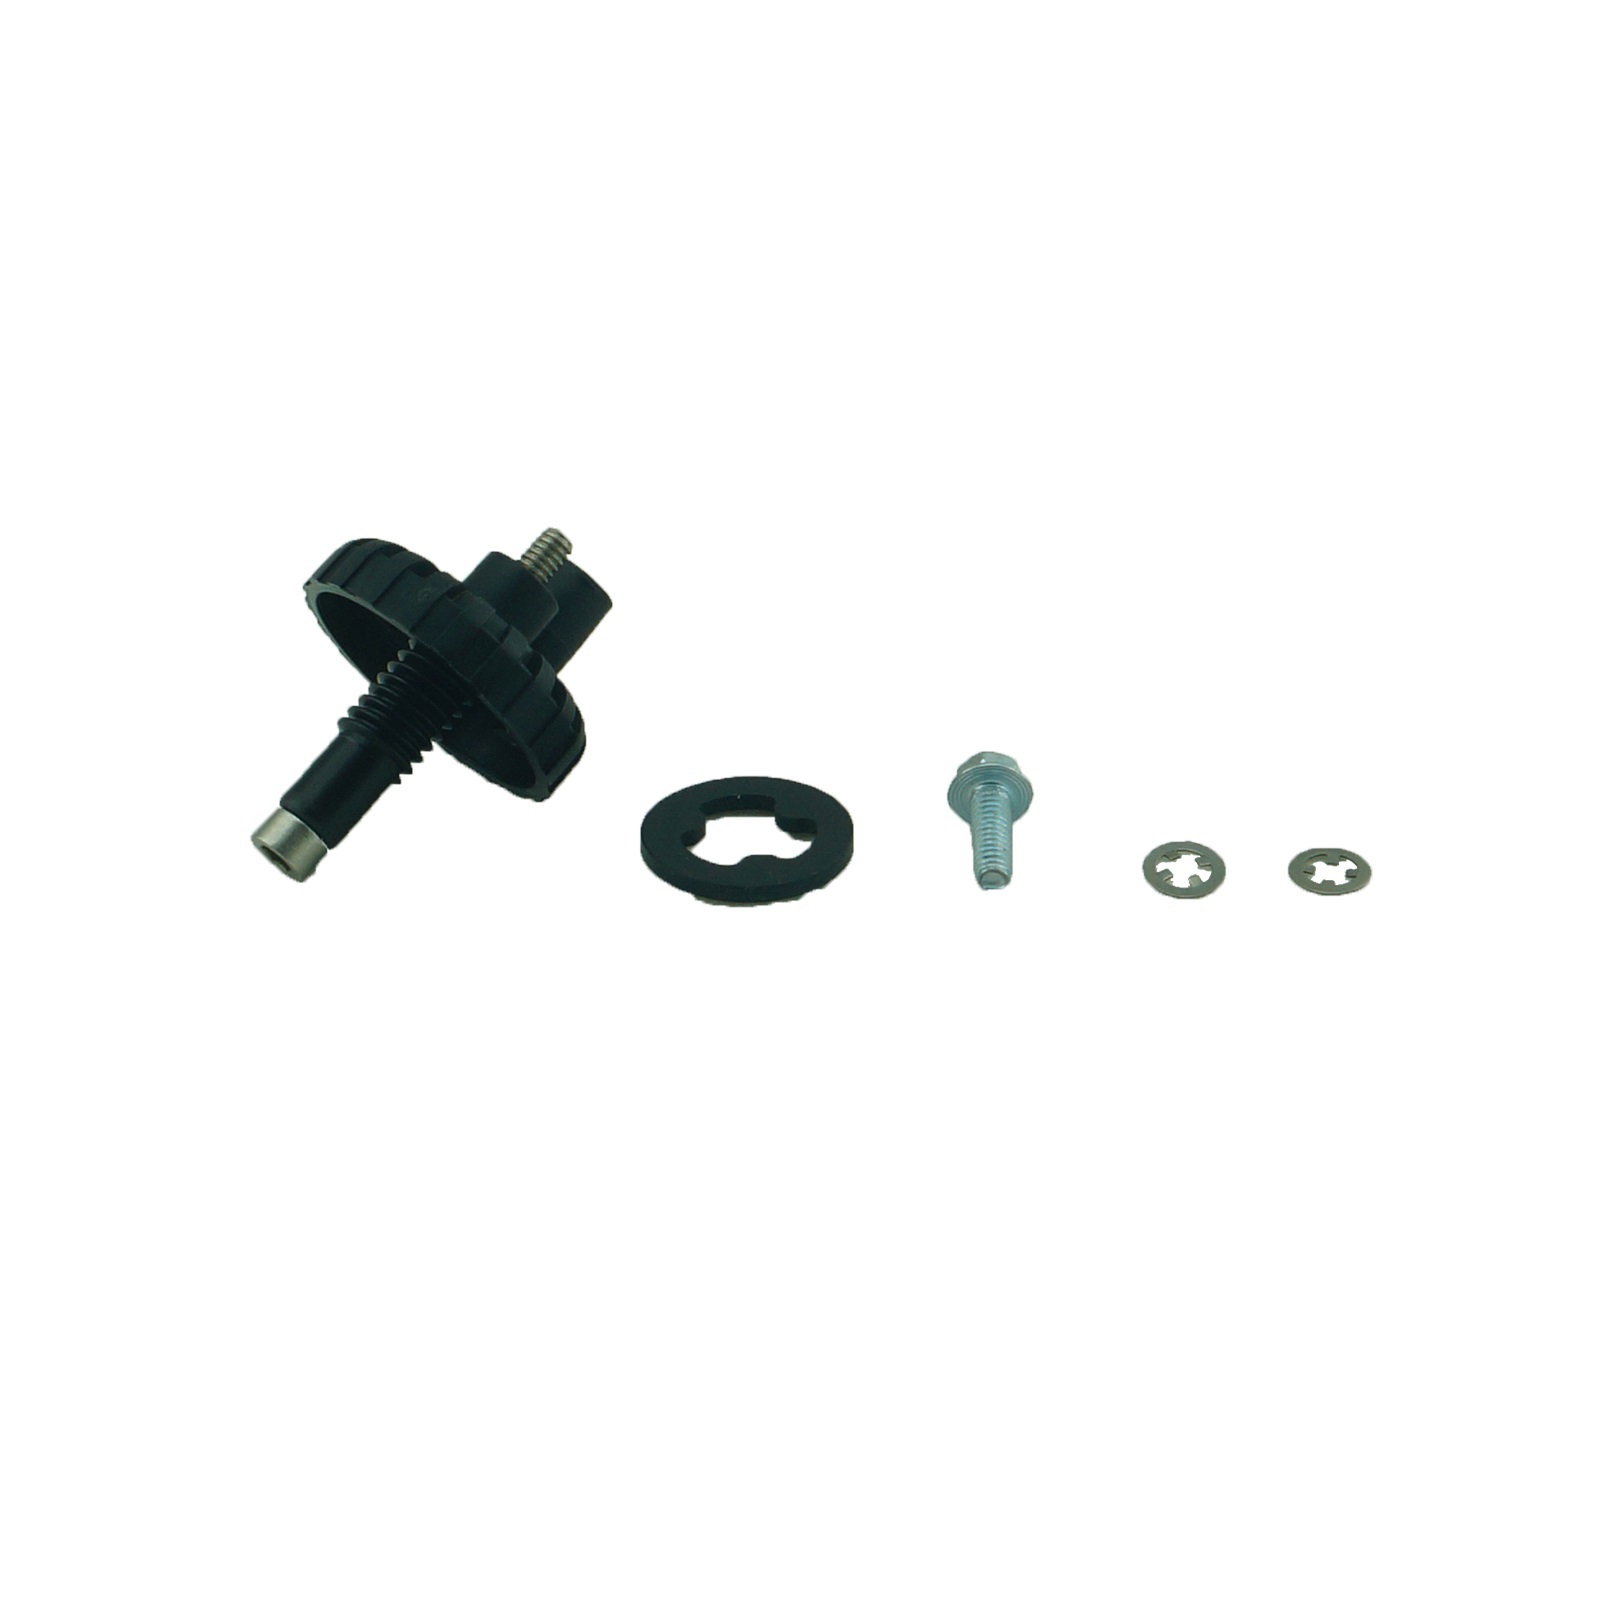 Flashlube (Fuel Manager) Water Sensor Kit with 12 Volt In Dash LED Warning light